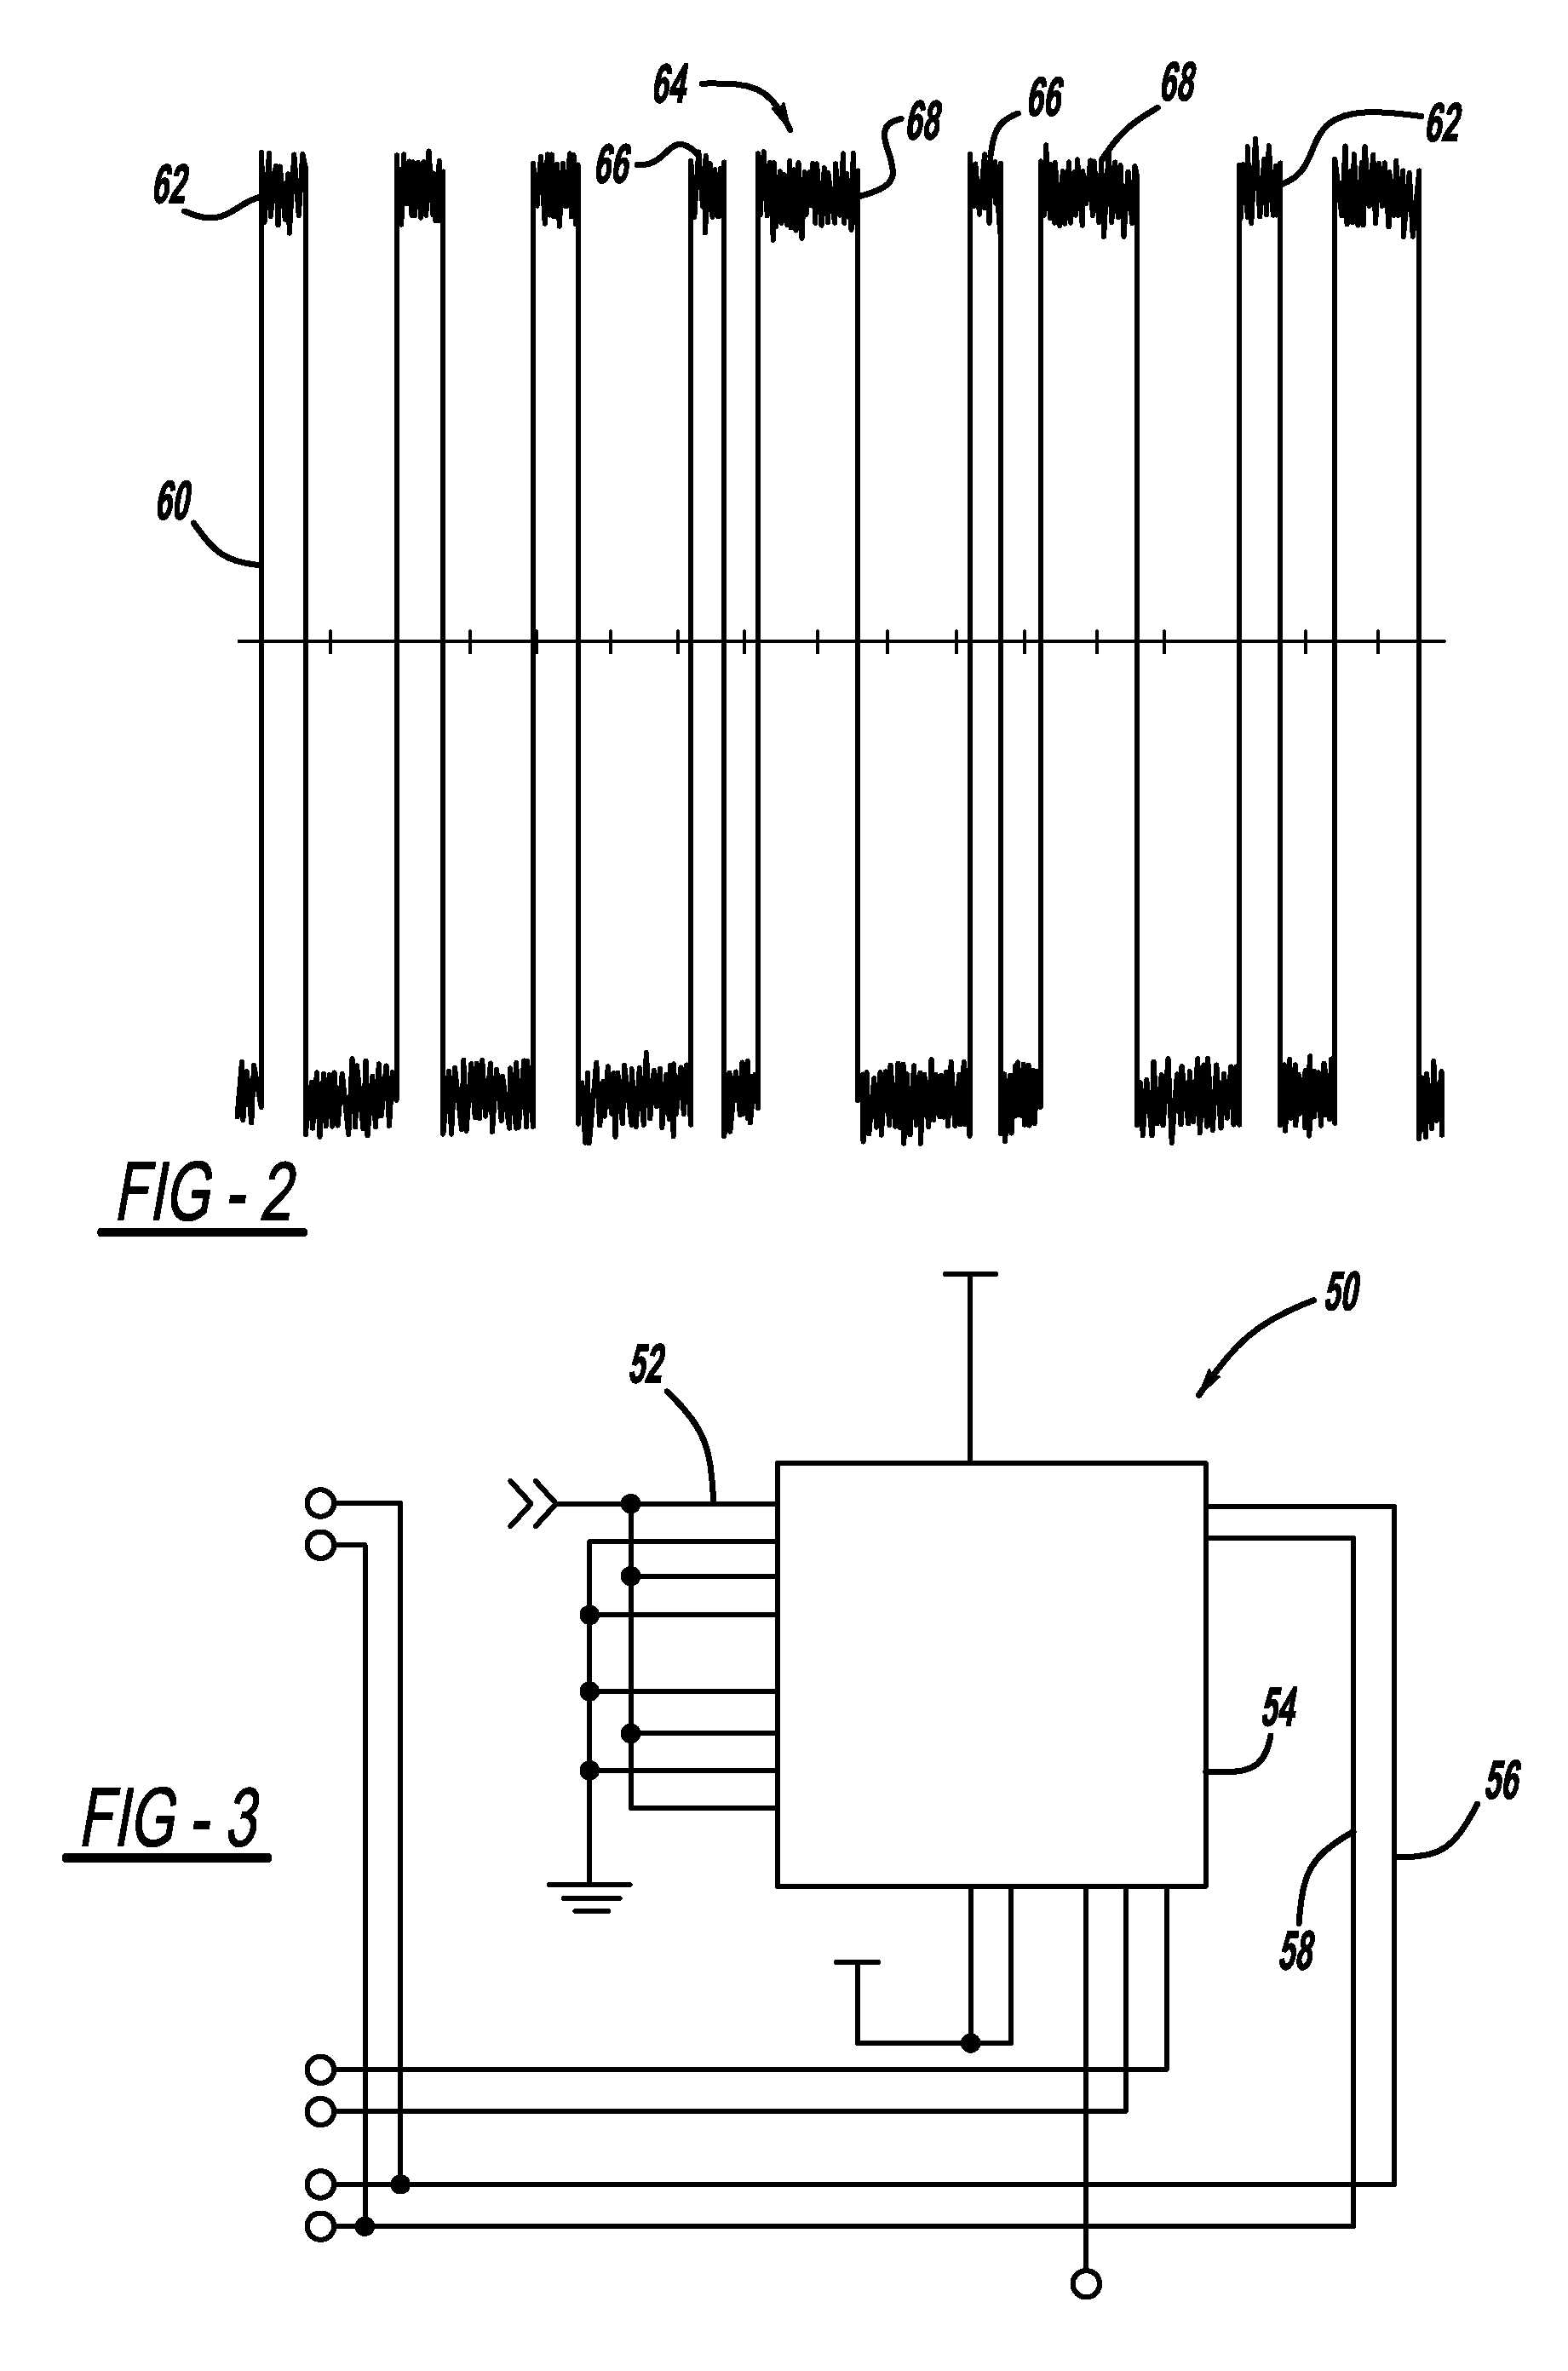 Frame sequence for a cell voltage measurement system with a low probability of natural occurrence